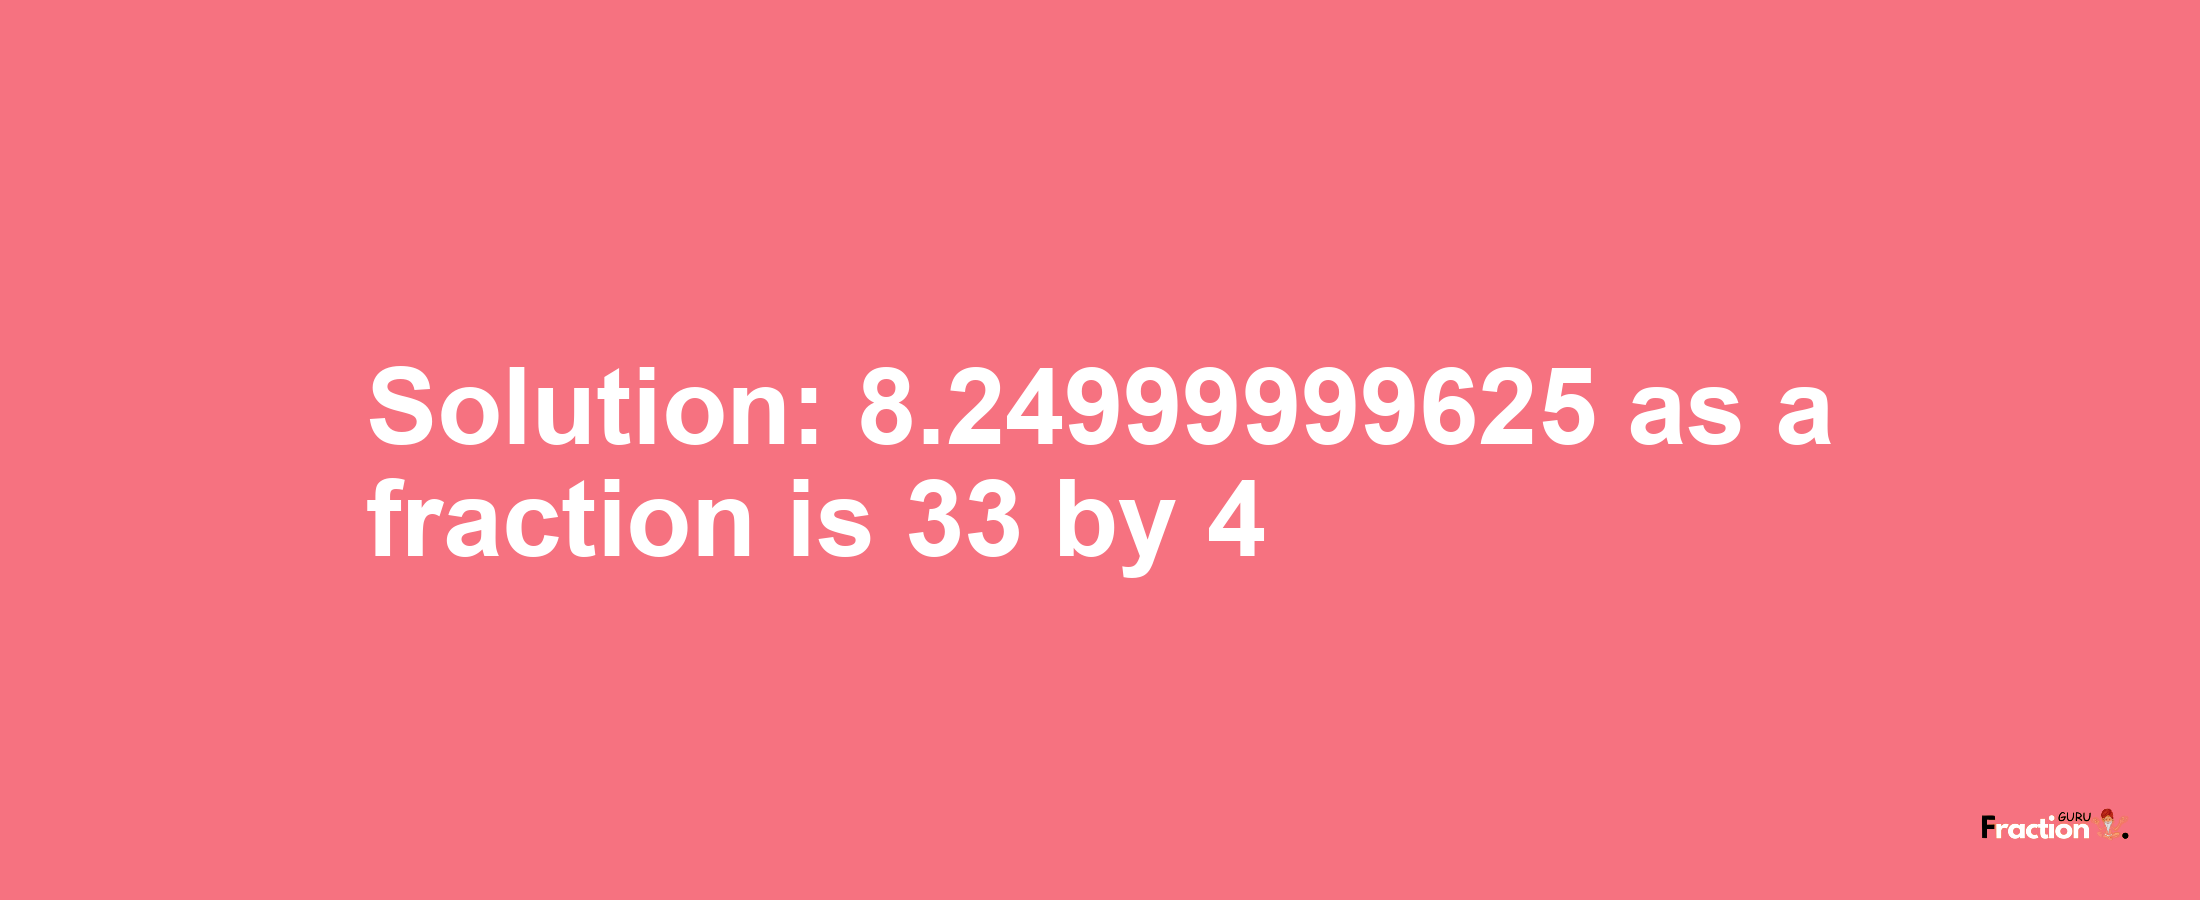 Solution:8.24999999625 as a fraction is 33/4